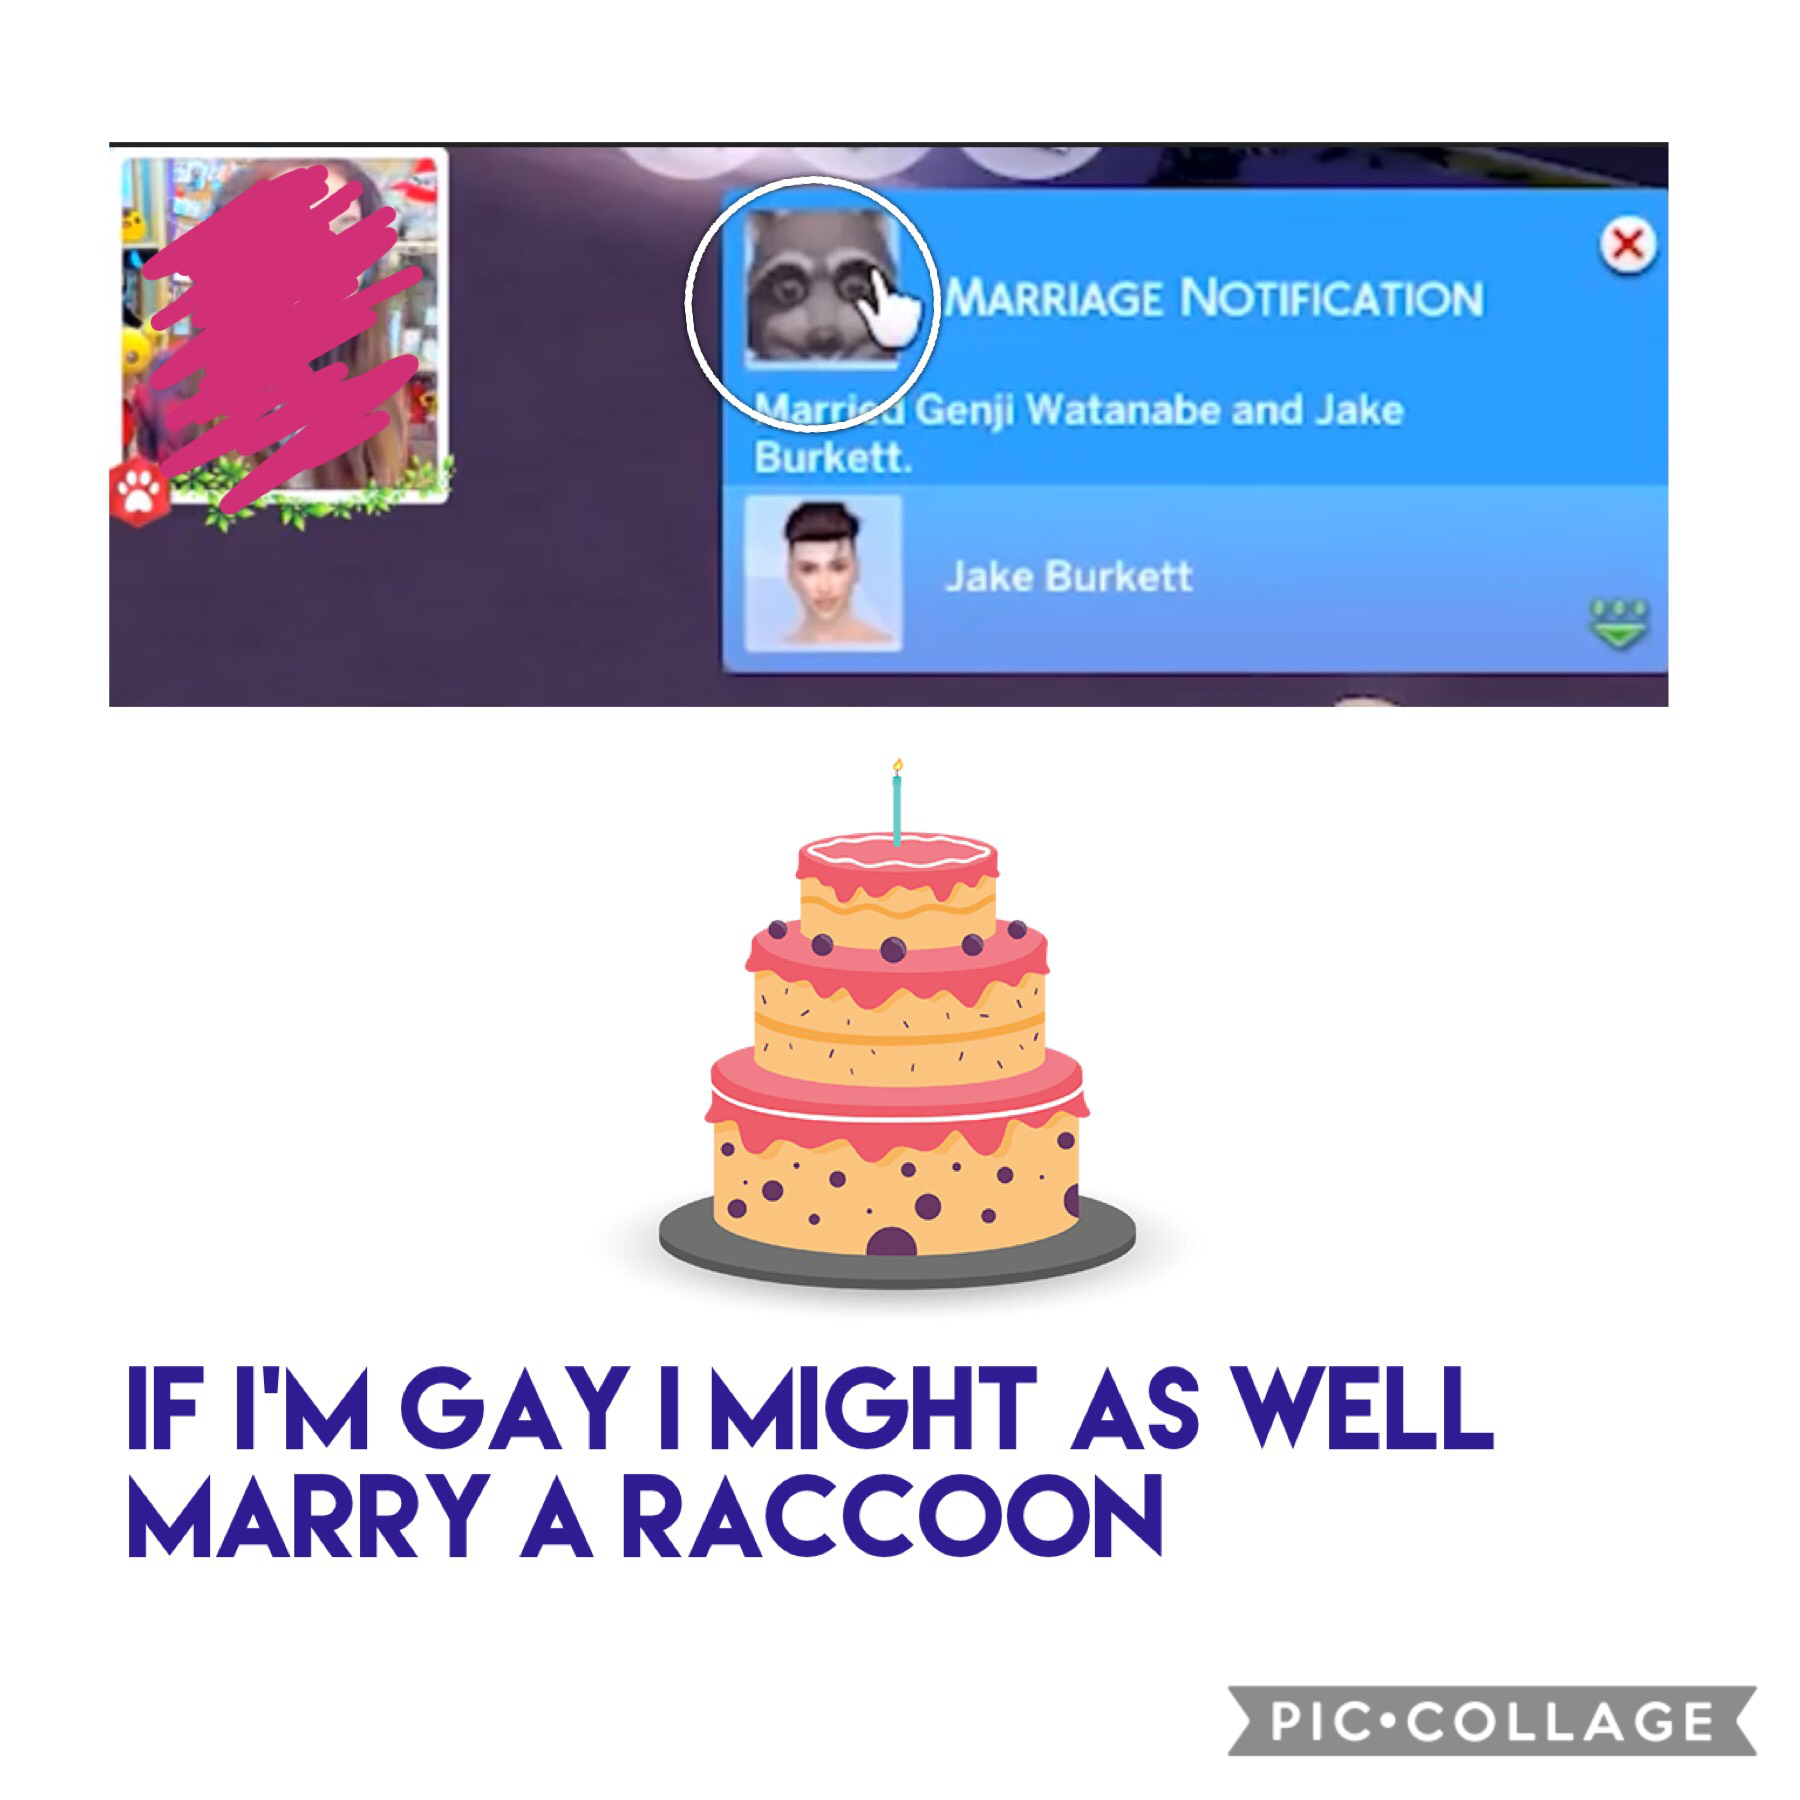 In Sims 4